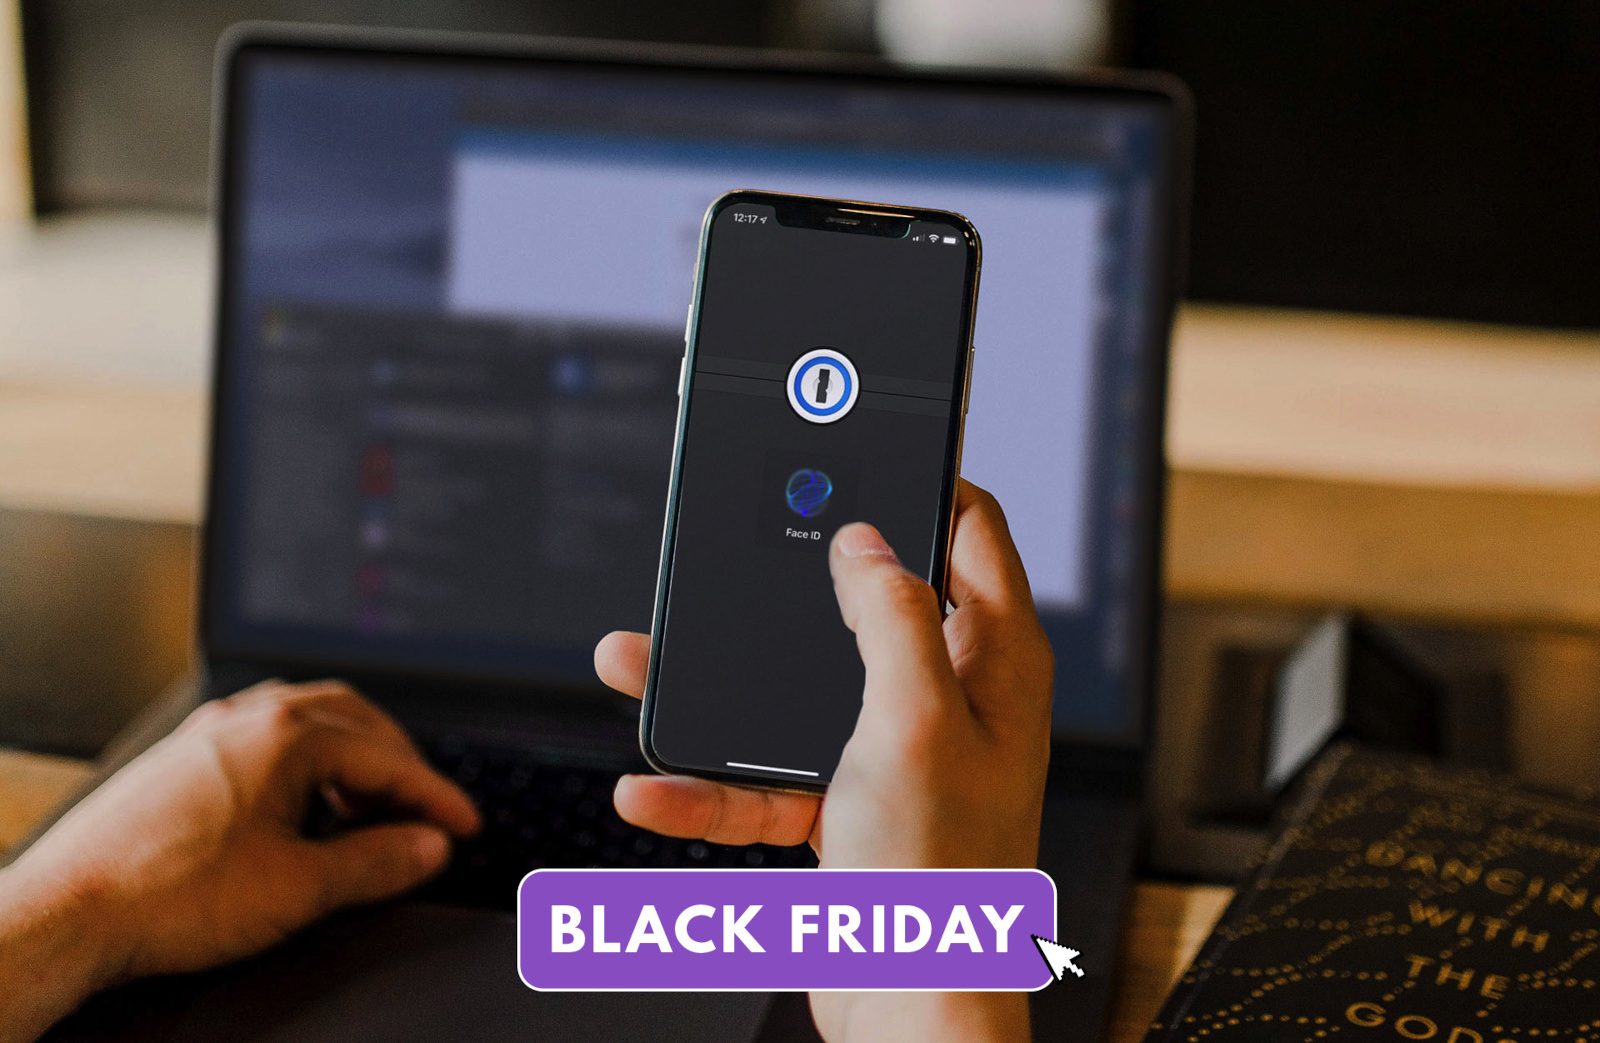 1Password Black Friday deal Save 50 percent on the password manager's